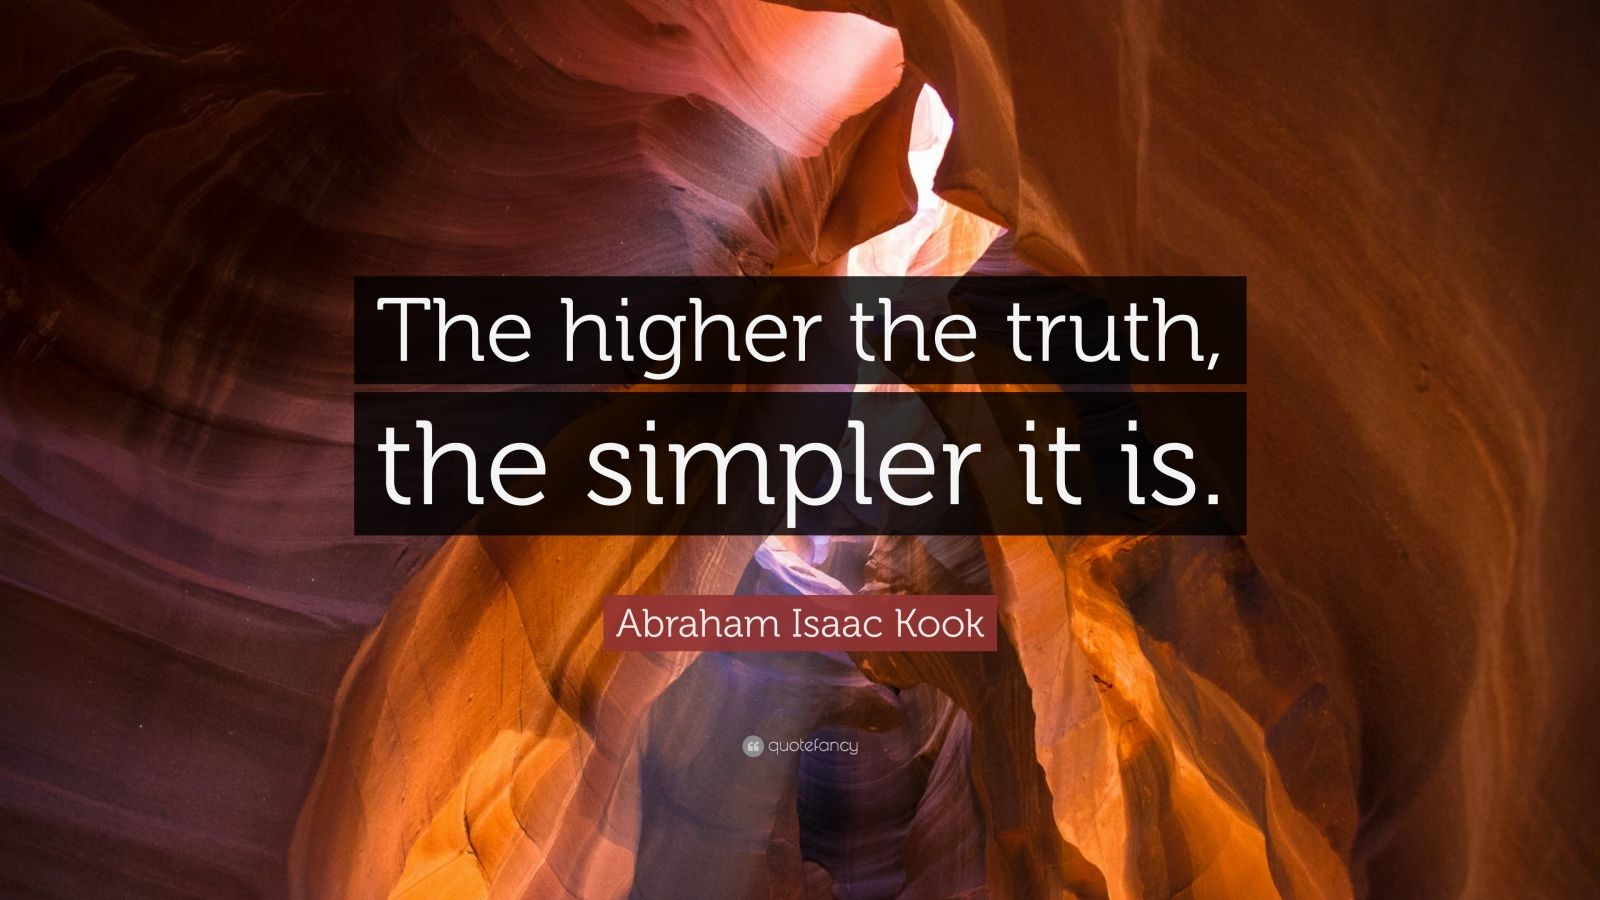 Top 15 Abraham Isaac Kook Quotes 2021 Edition Free Images Quotefancy 